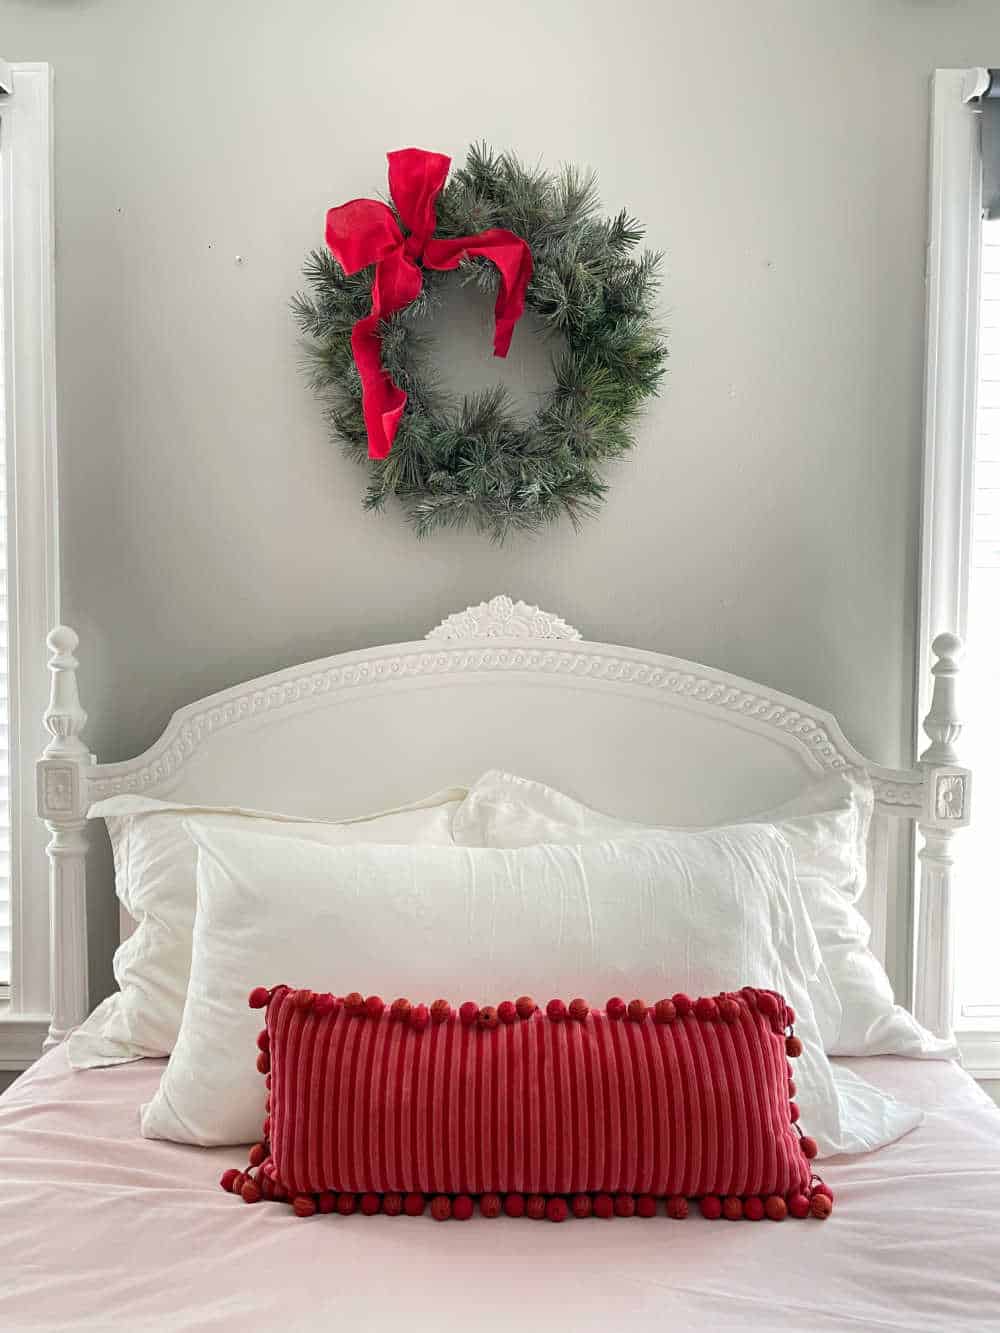 Red Pink Christmas Bedroom decor